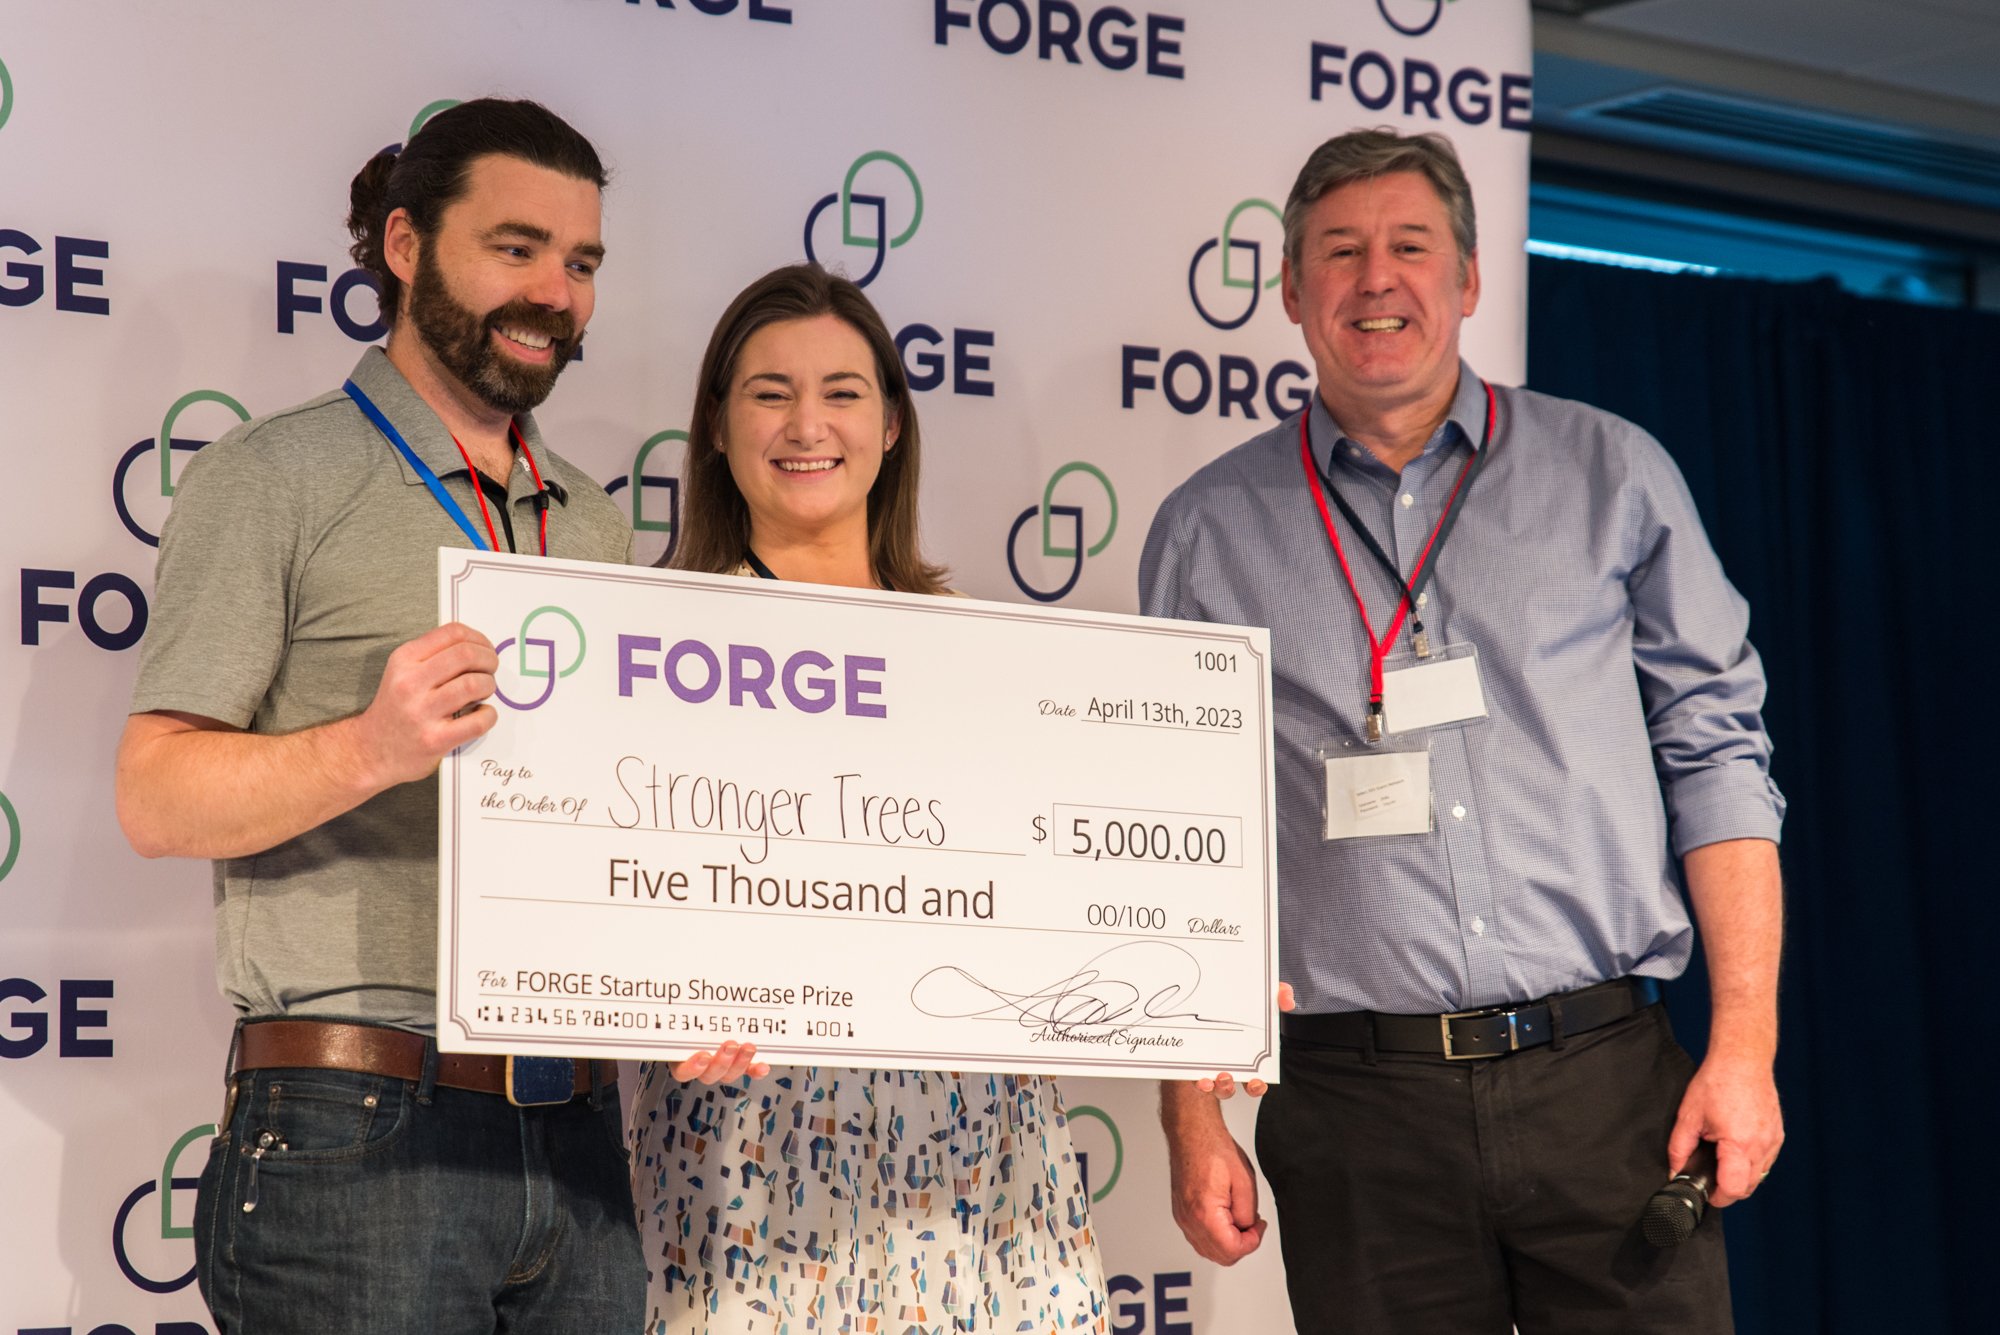 1st place, concept ($5,000) – Stronger Trees